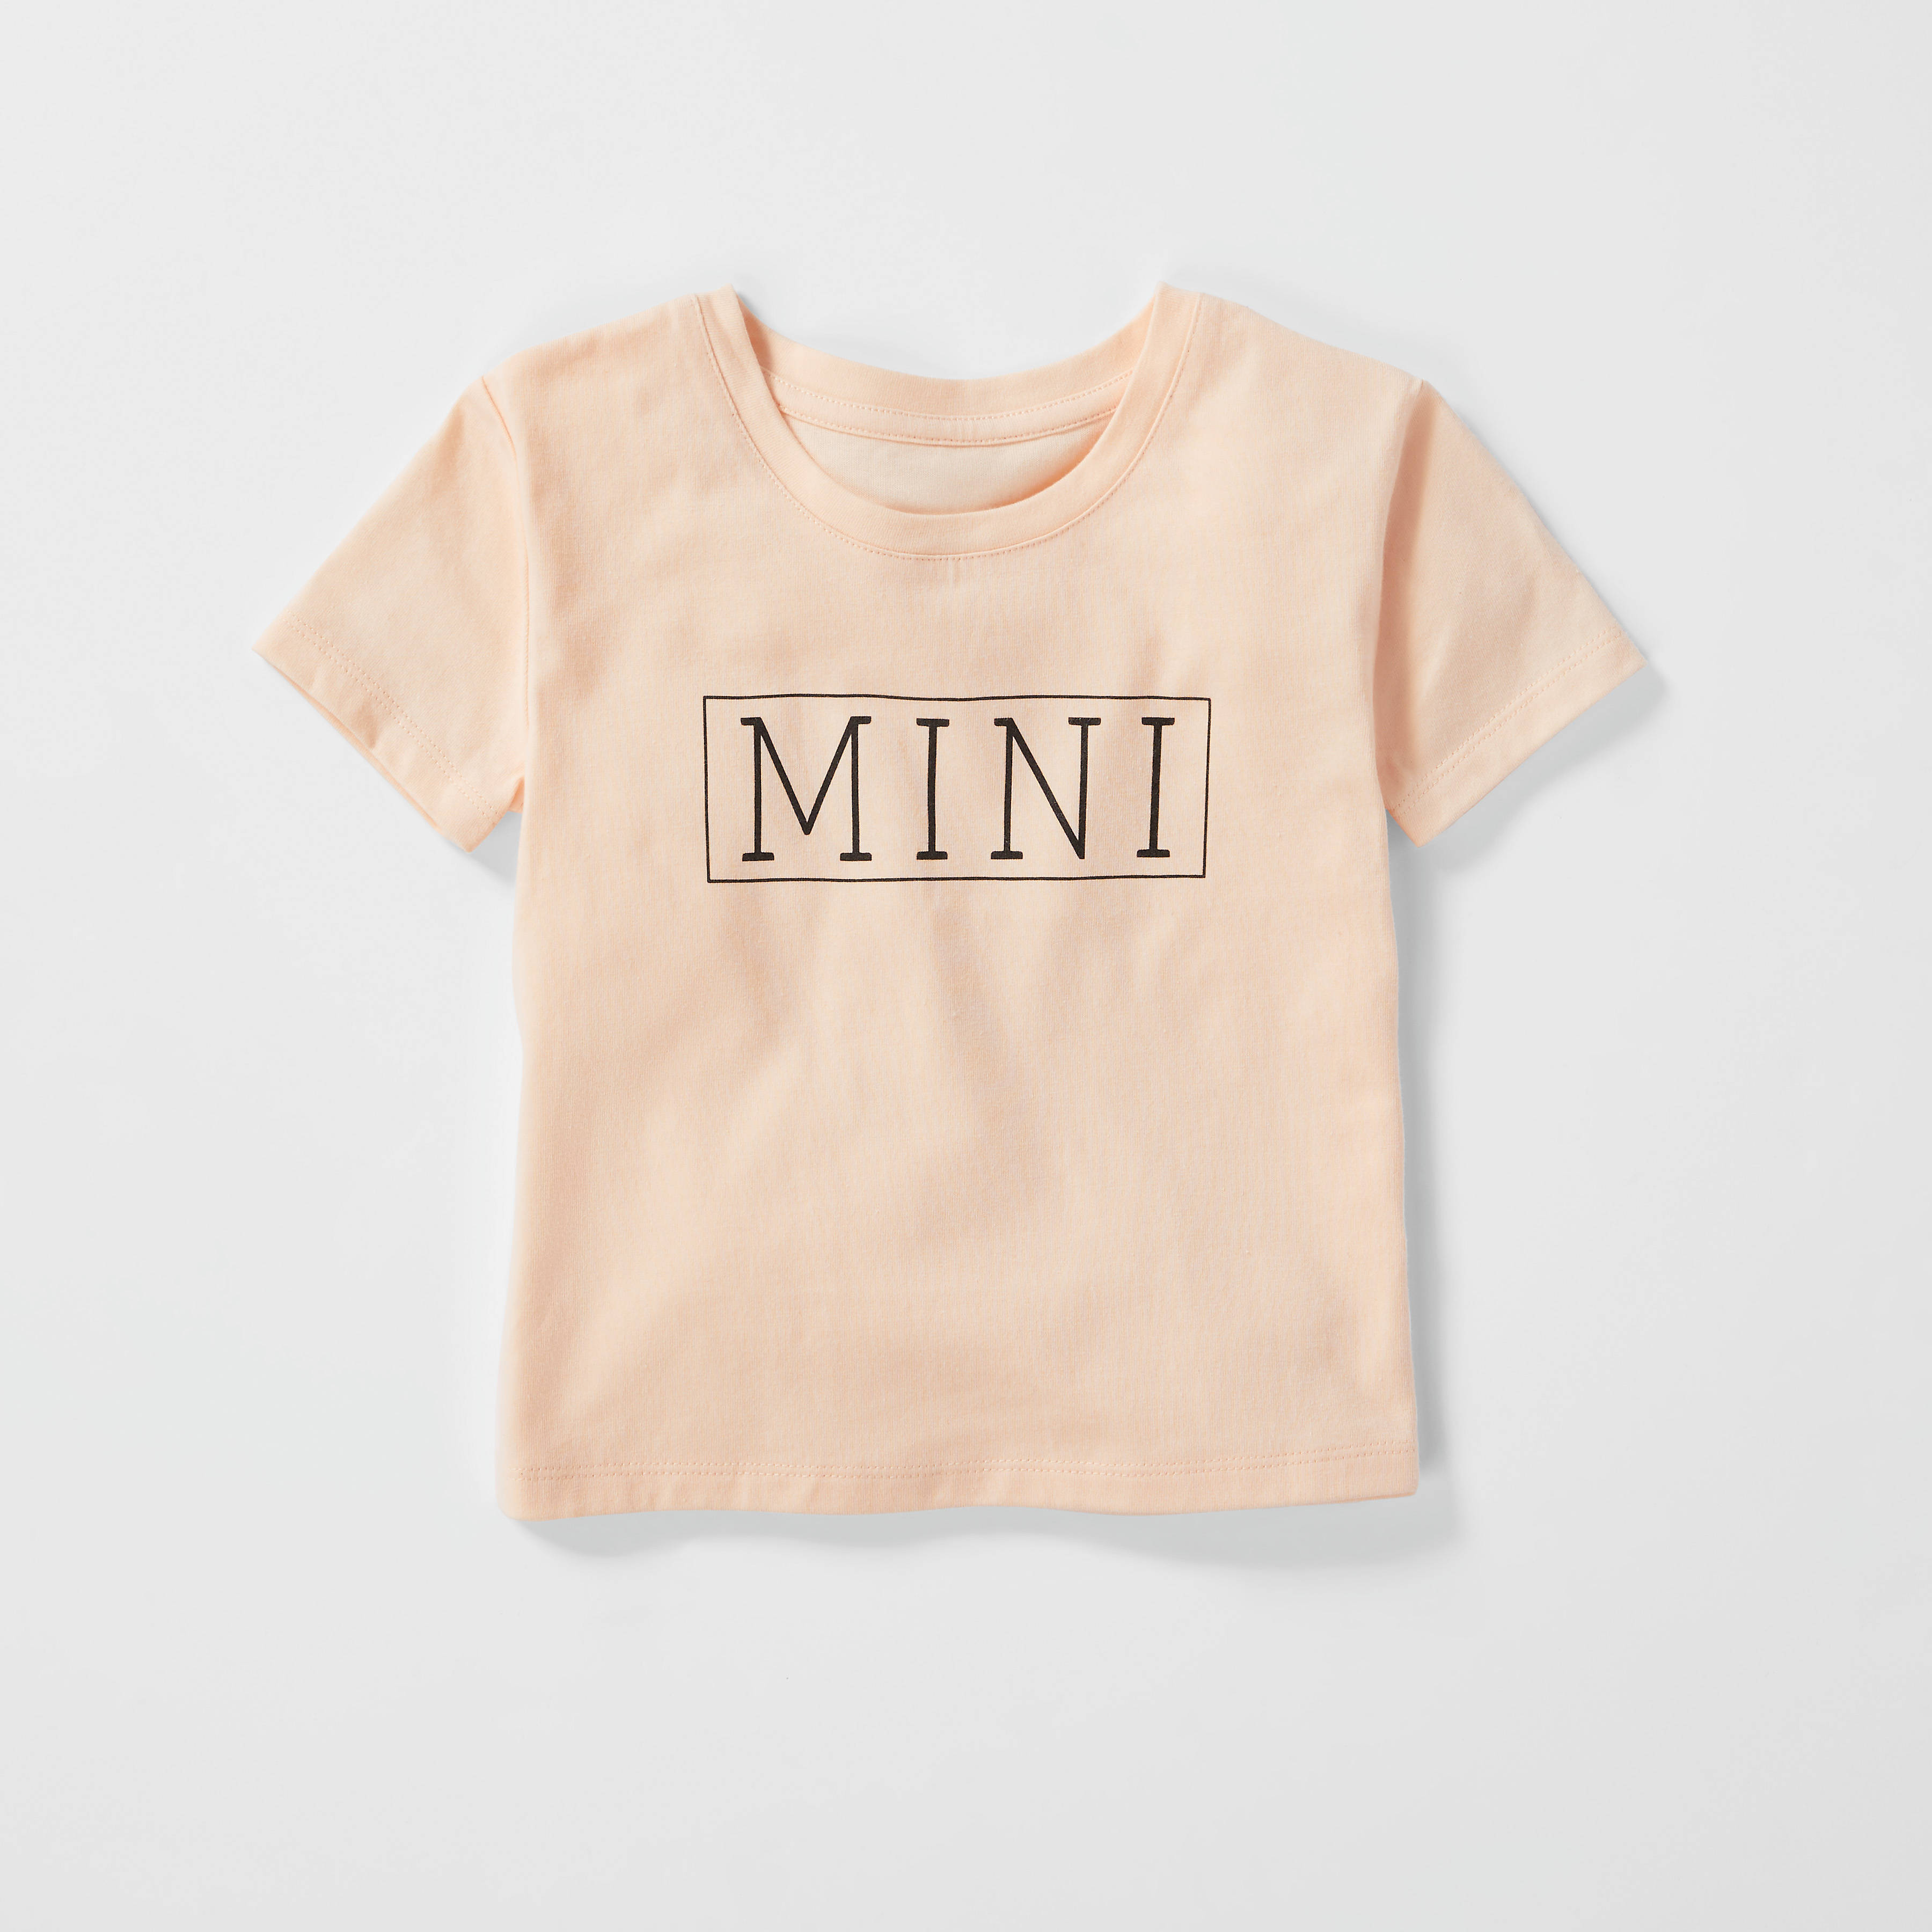 SS Crew Neck Graphic: Sans Serif Mini 1121171:Sunset Pink Pearl 40-0005-11:5 Product Image 1